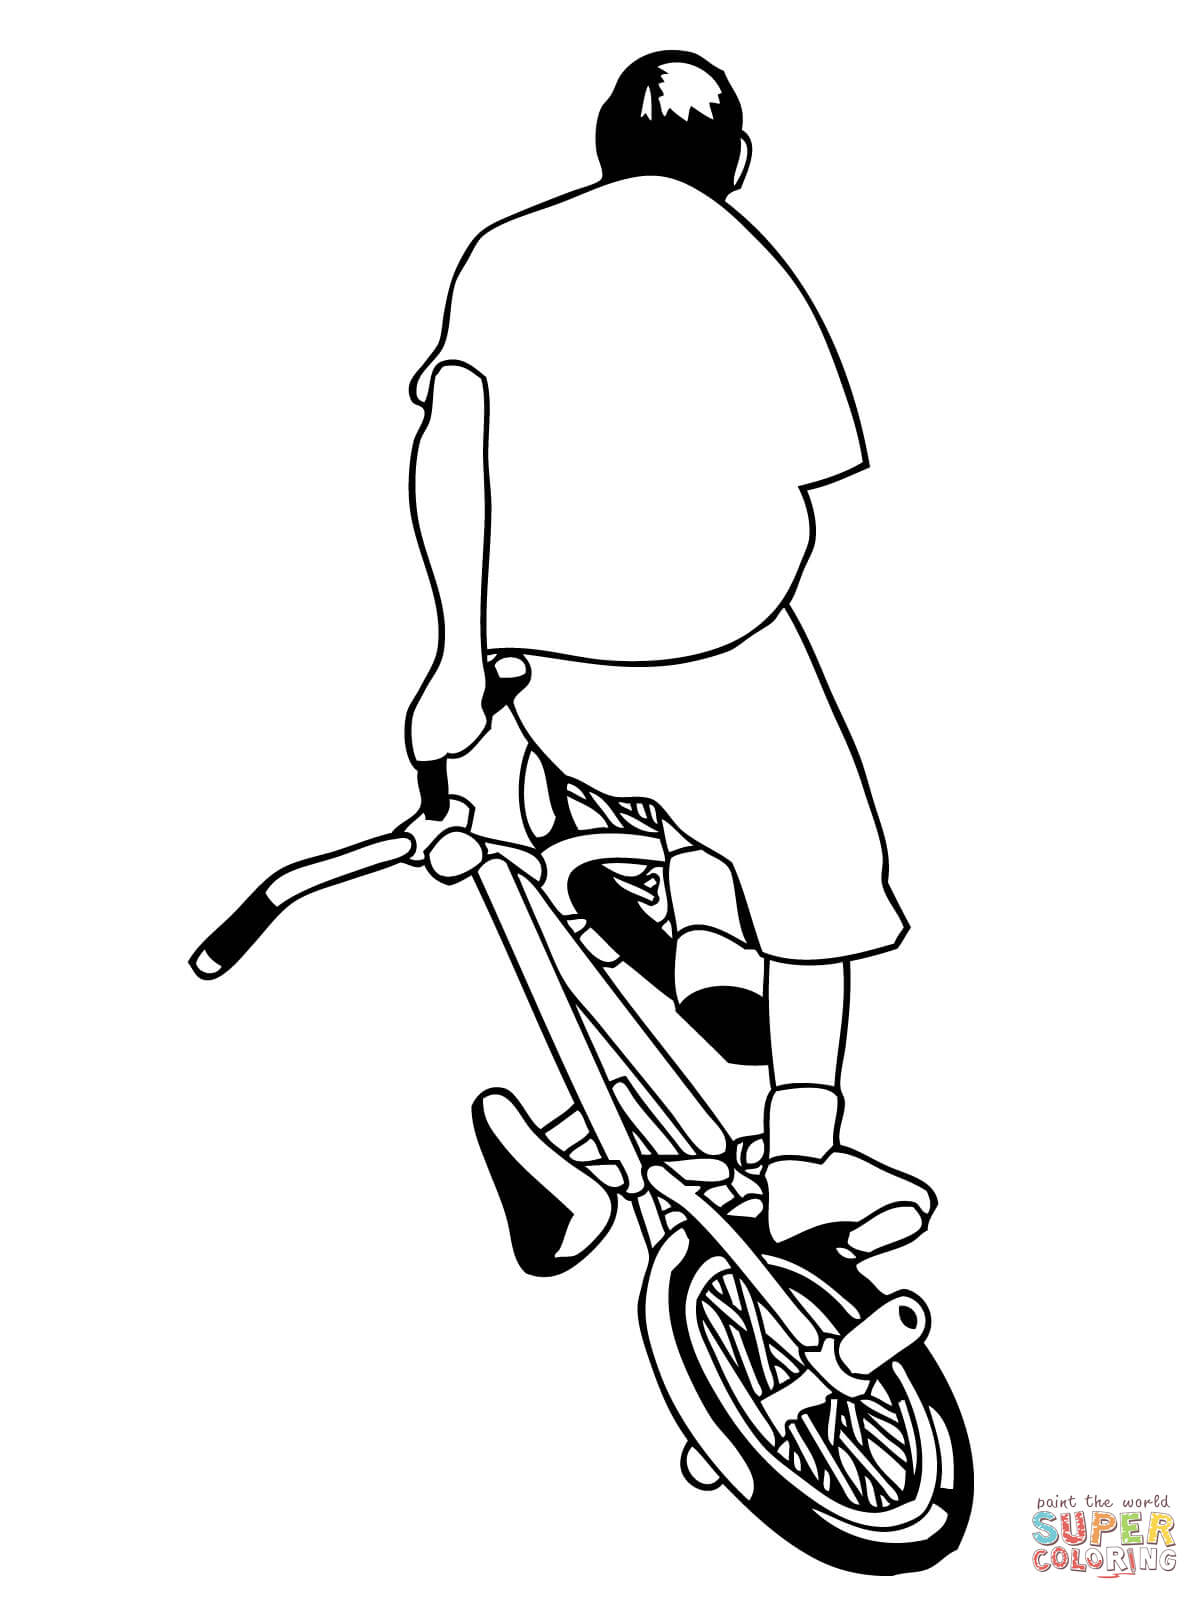 Bmx Coloring Pages To Print - Coloring Pages For All Ages